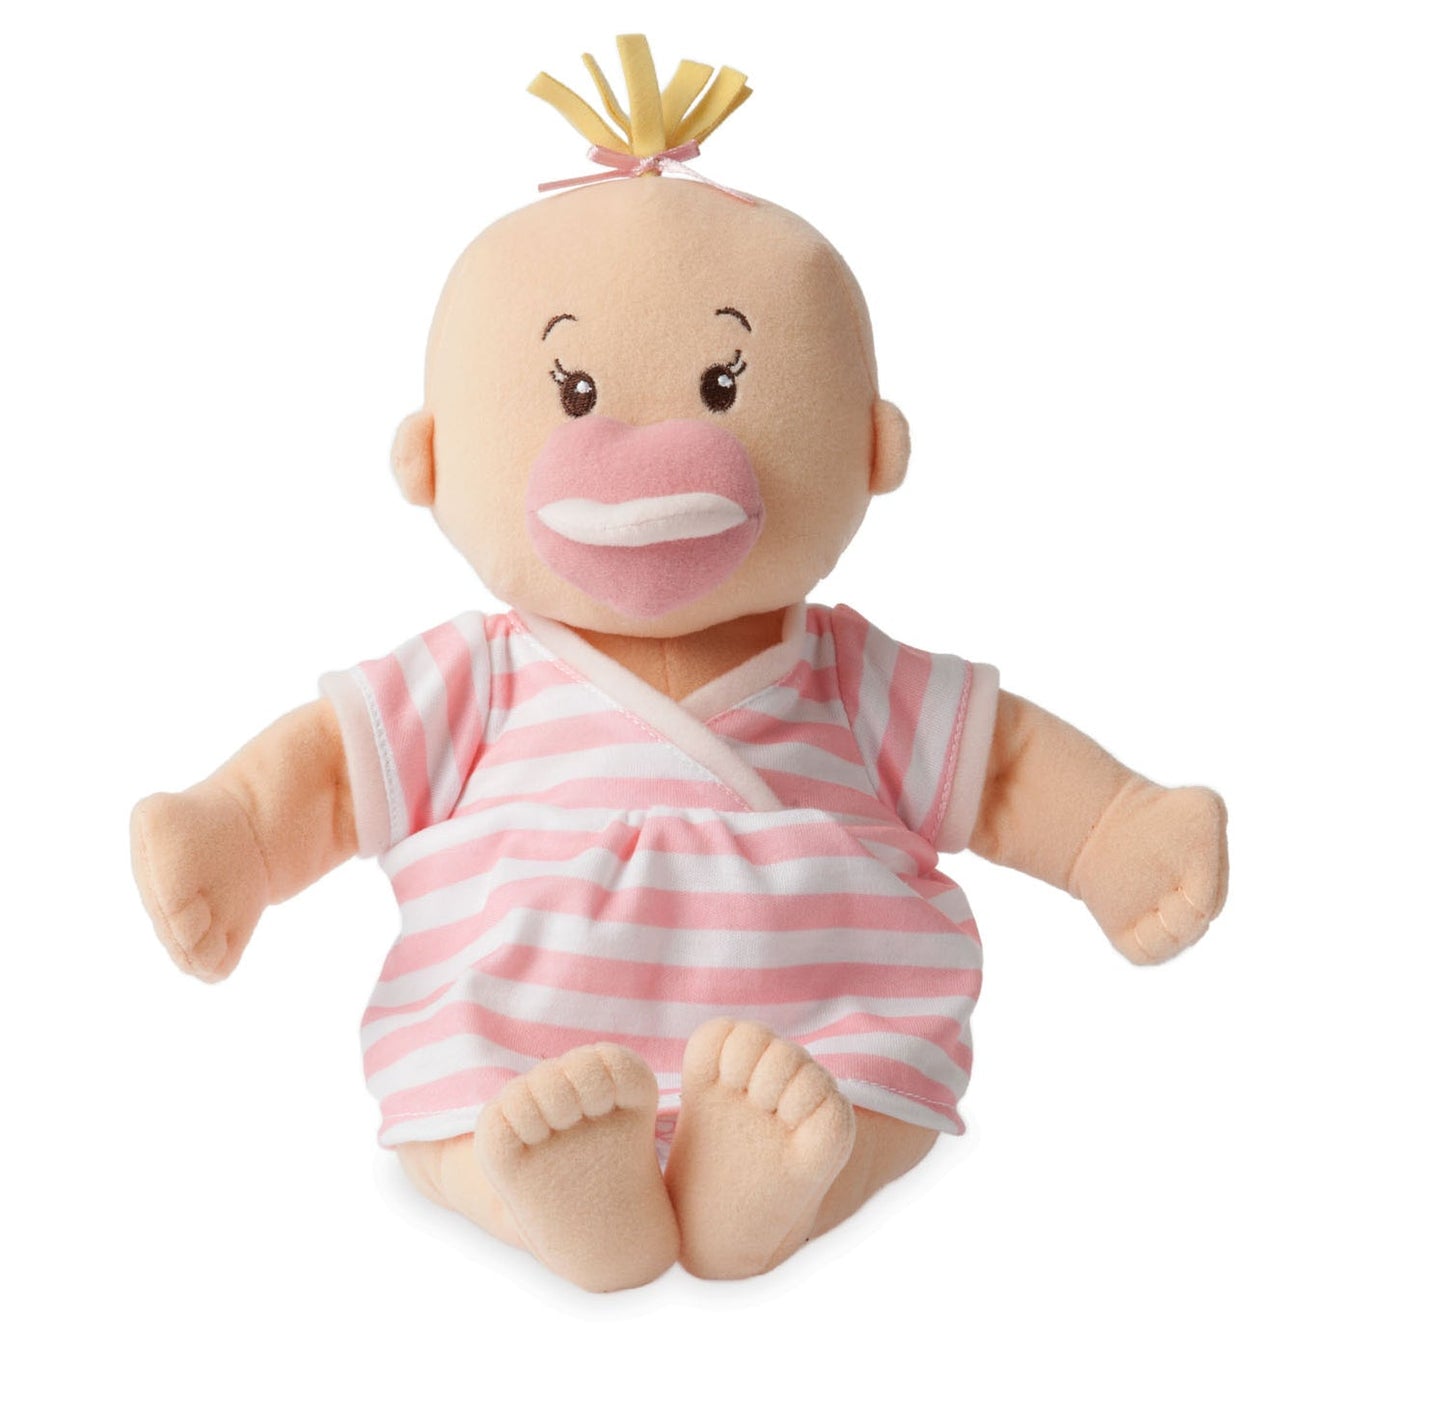 Baby Stella Peach Doll with Yellow Hair Toys Manhattan Toy Company   